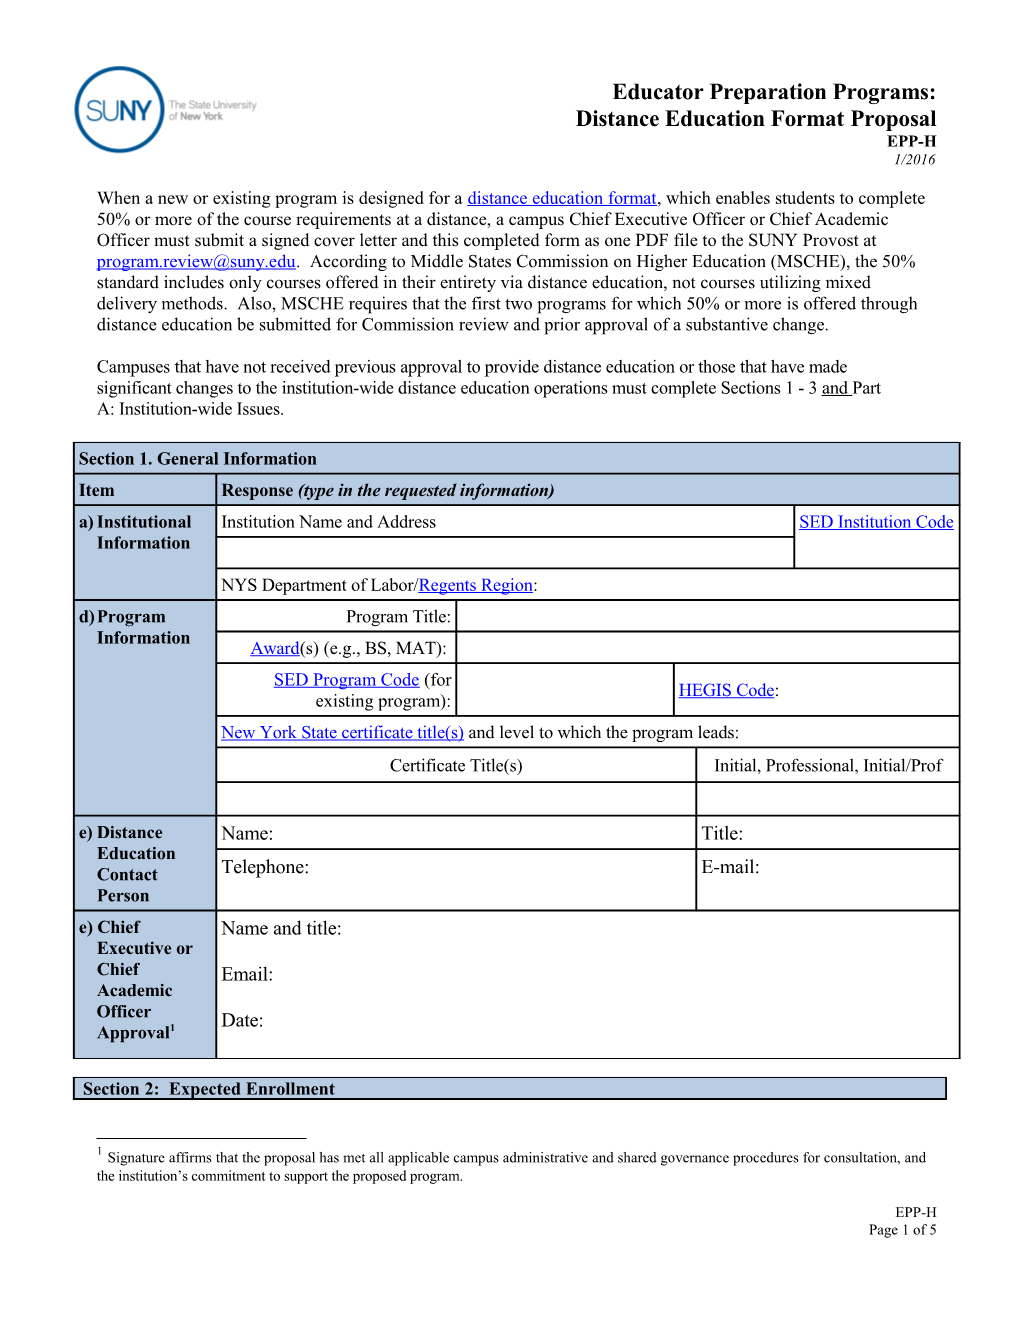 Application for Addition of the Distance Education Format s1